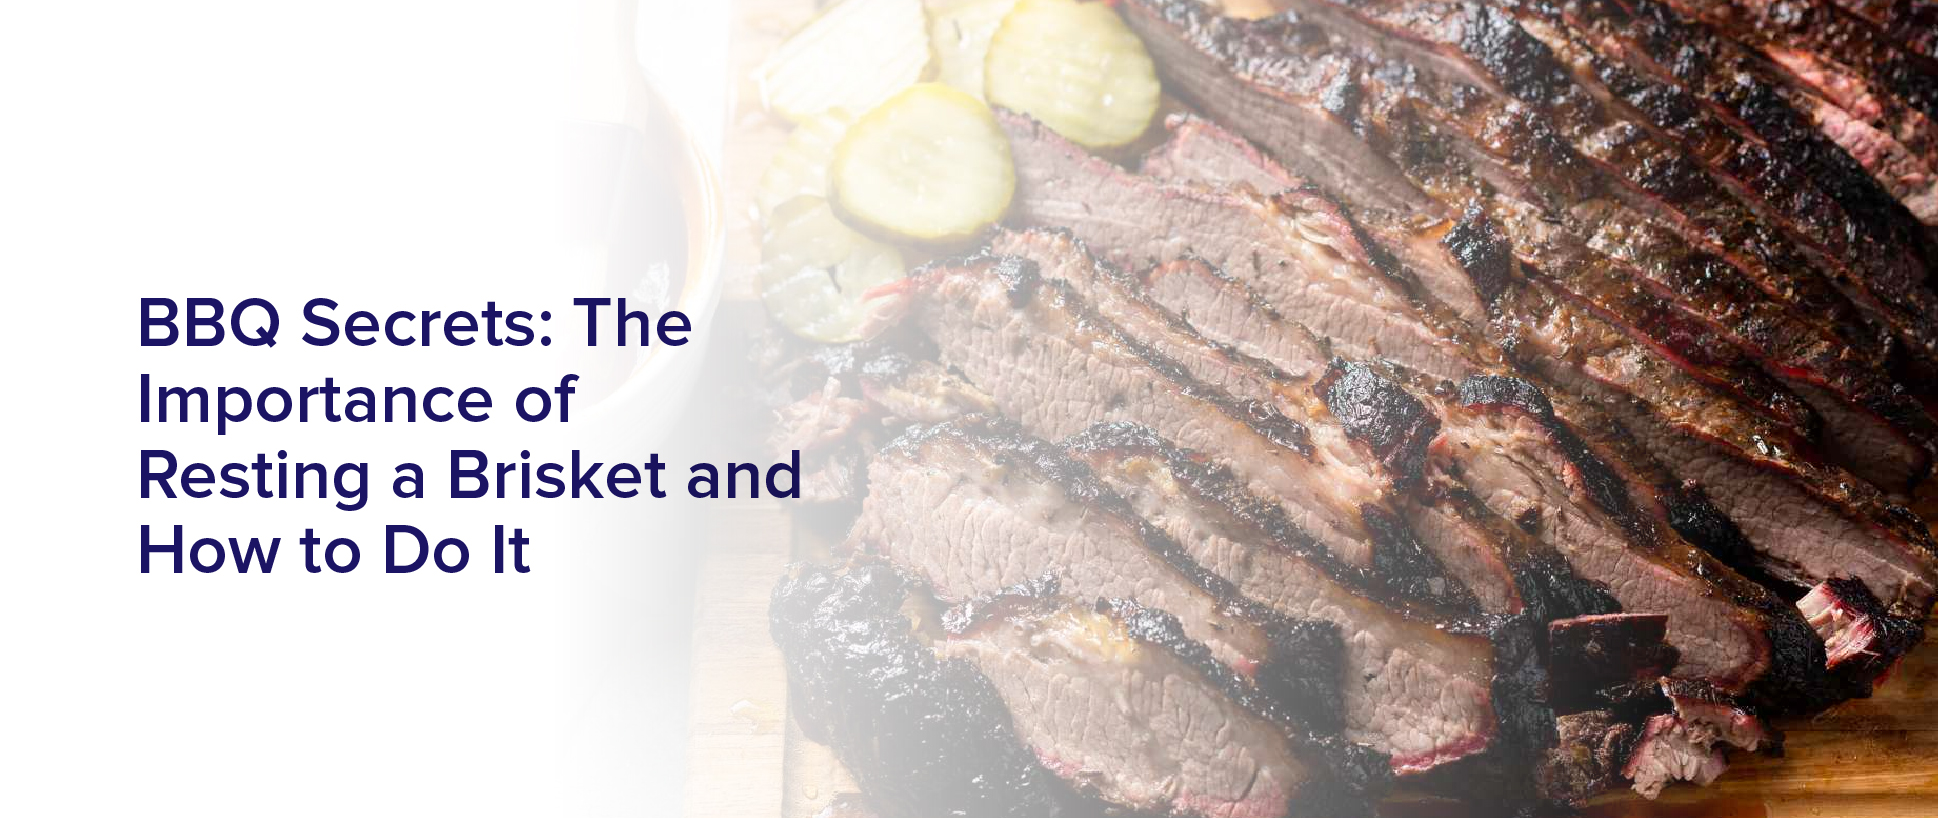 Bbq Secrets: The Importance Of Resting A Brisket And How To Do It"